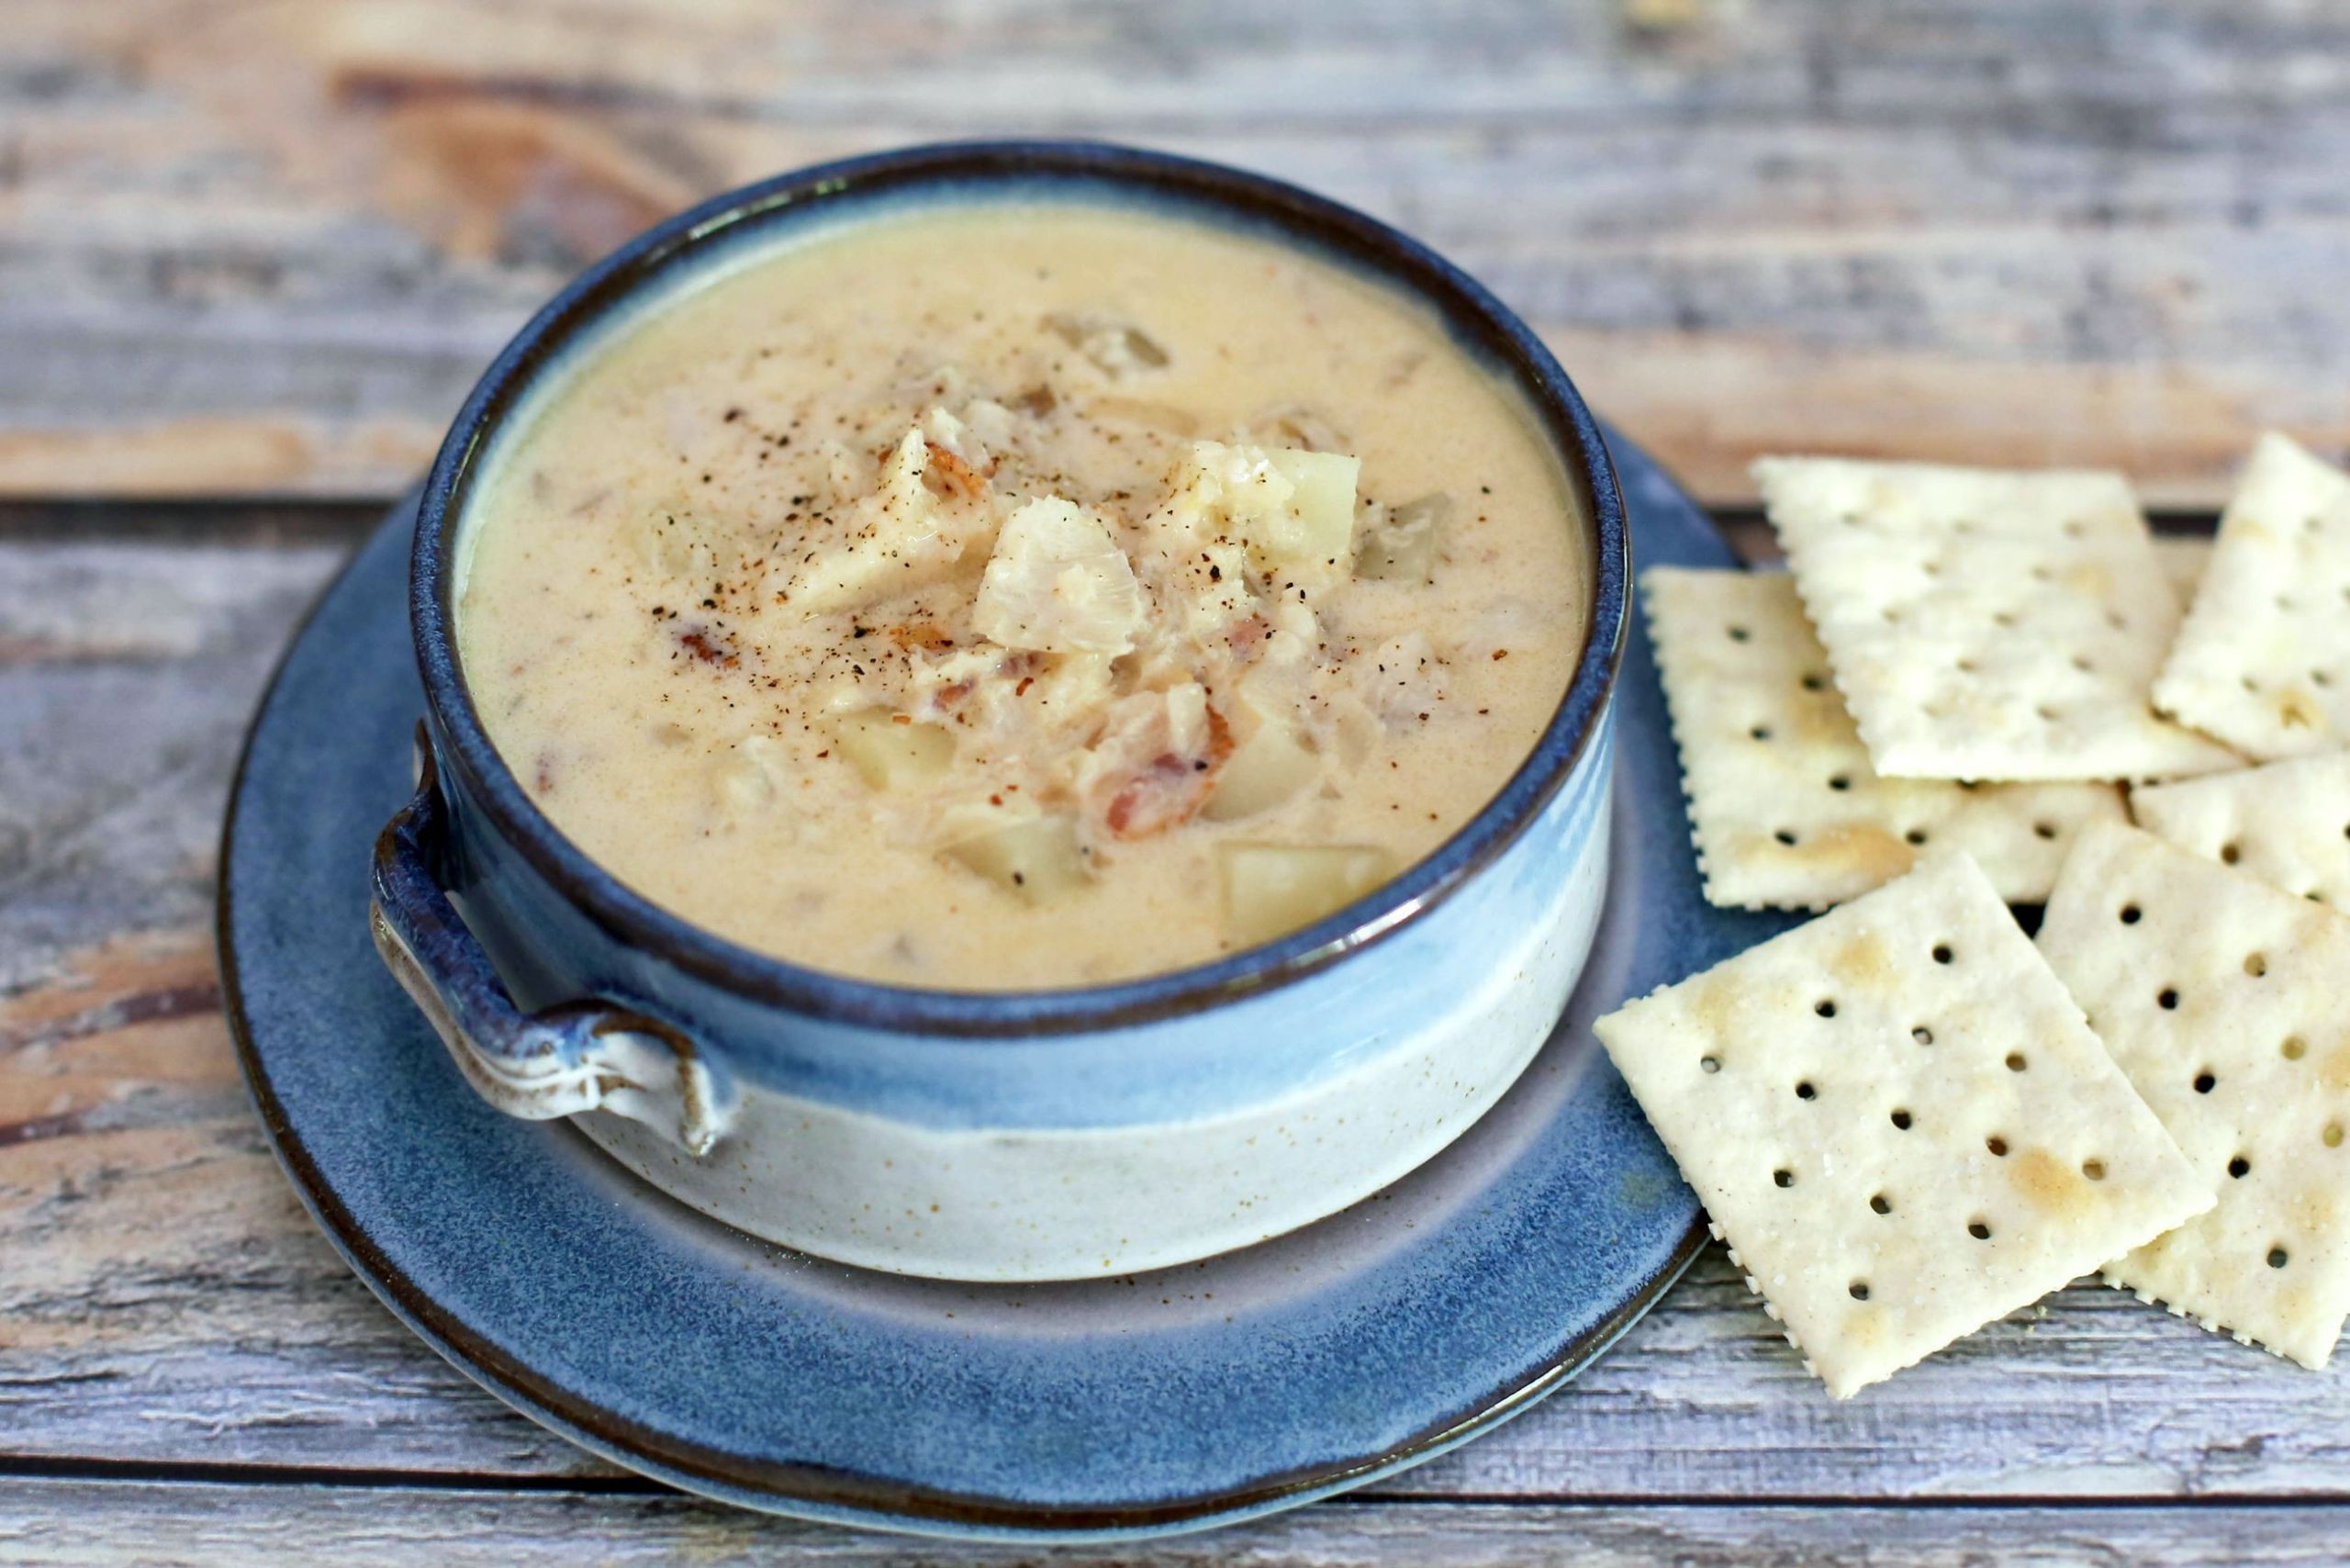 Fish Chowder Recipe With Bacon
 Slow Cooker Fish Chowder Recipe